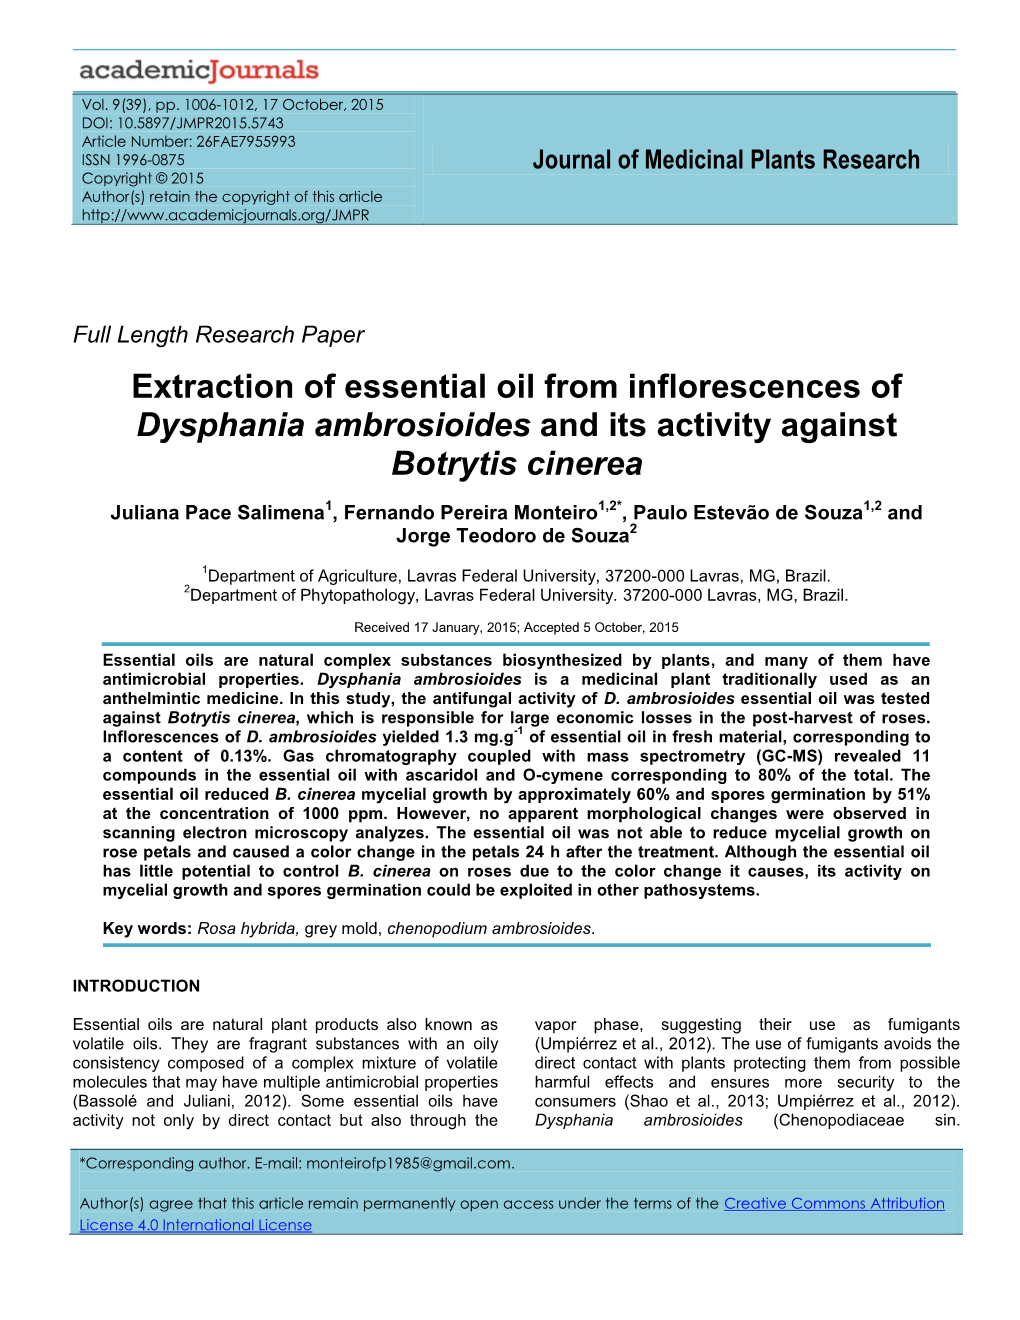 Extraction of Essential Oil from Inflorescences of Dysphania Ambrosioides and Its Activity Against Botrytis Cinerea